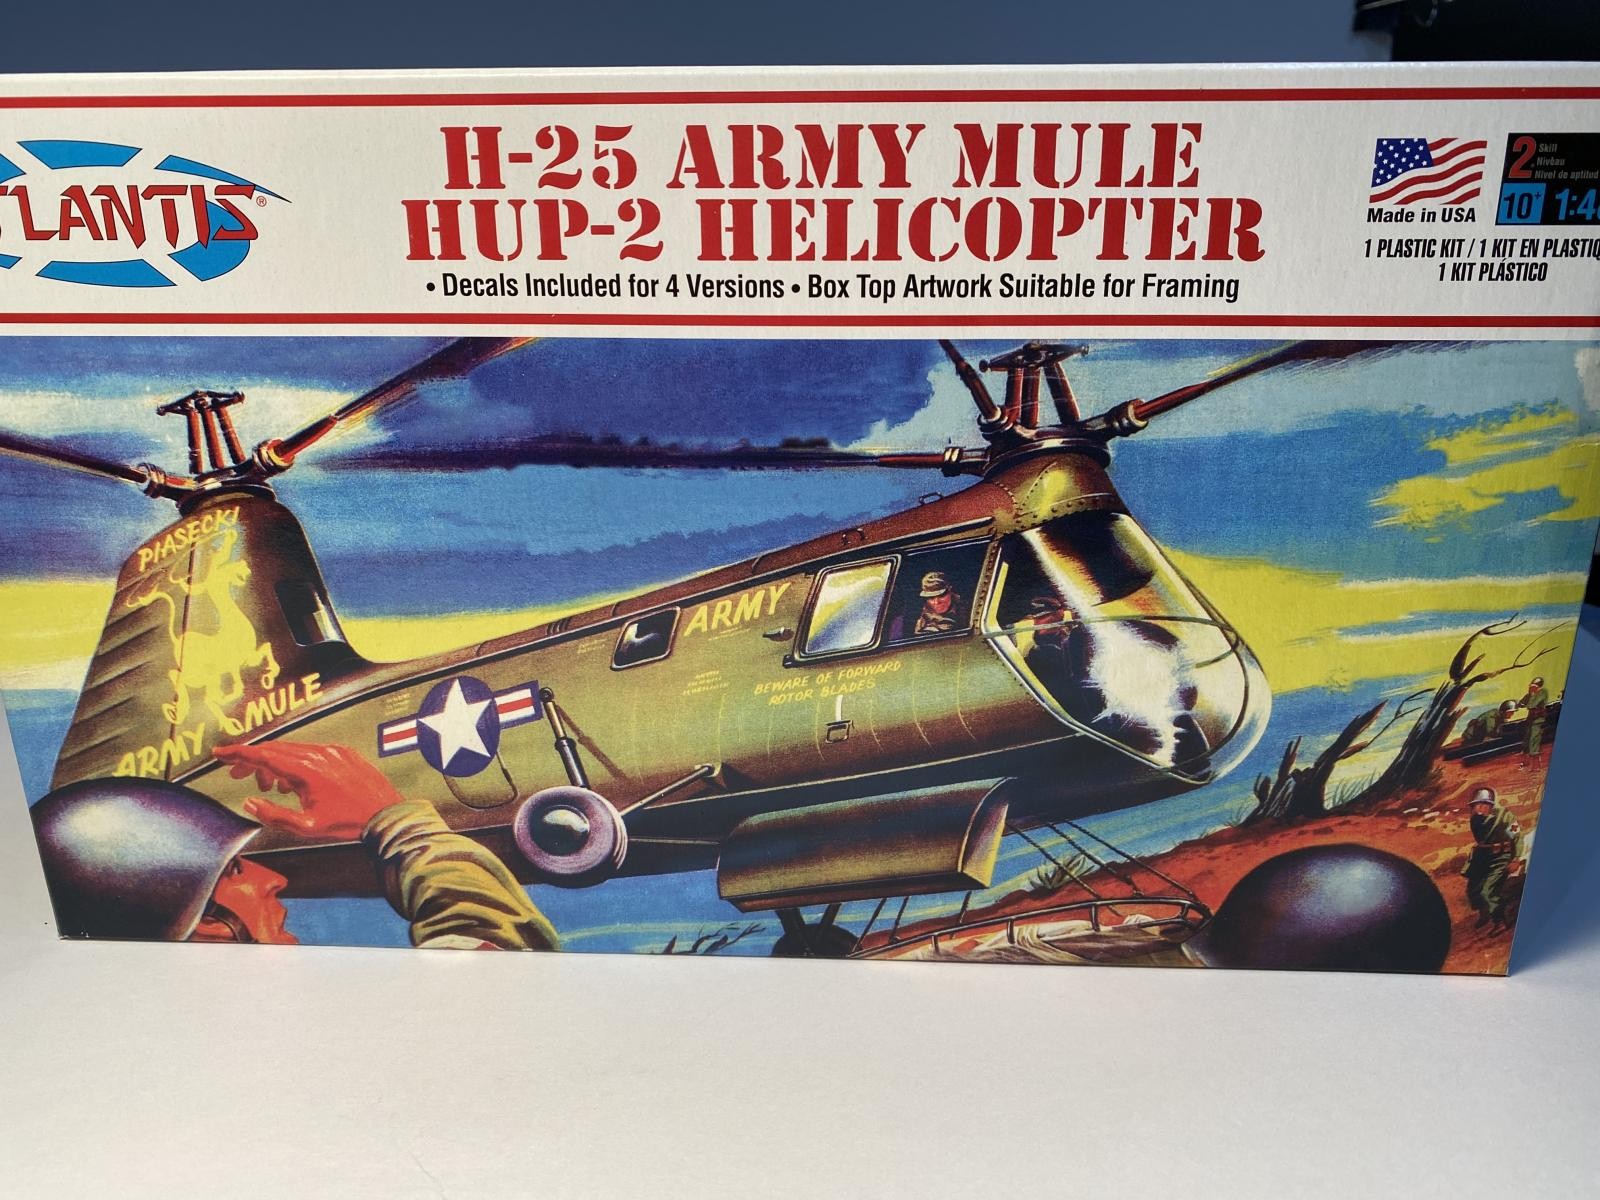 WWII US ARMY H-25 MULE HUP-2 HELICOPTER ATLANTIS 1:48 SCALE PLASTIC MODEL KIT 